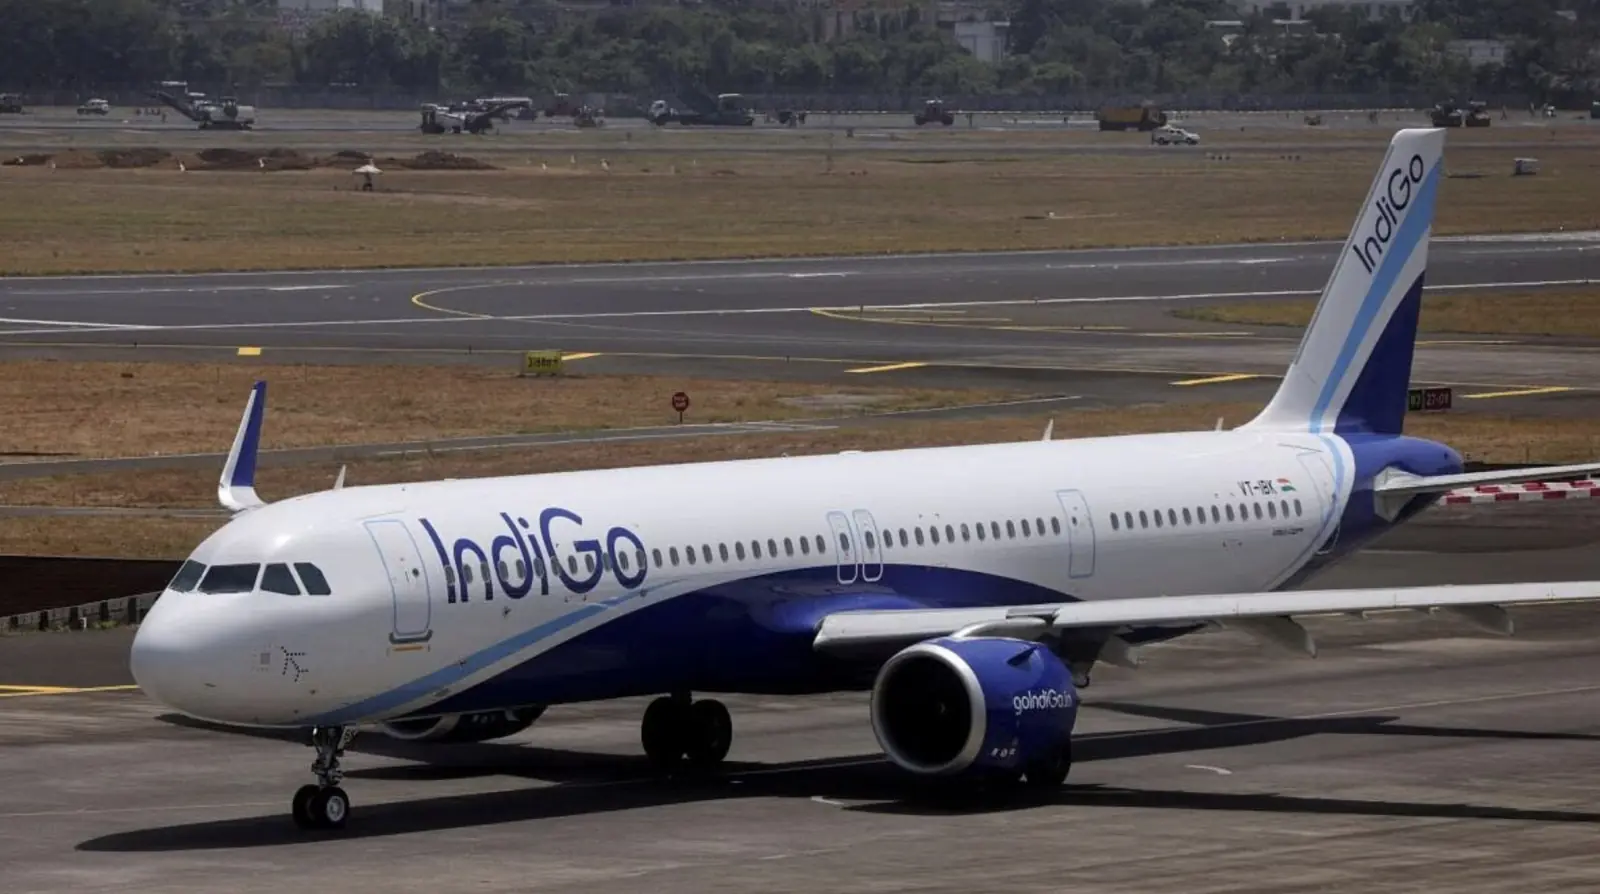 'IndiGo will double its services on international and domestic routes', the airline's CEO said this